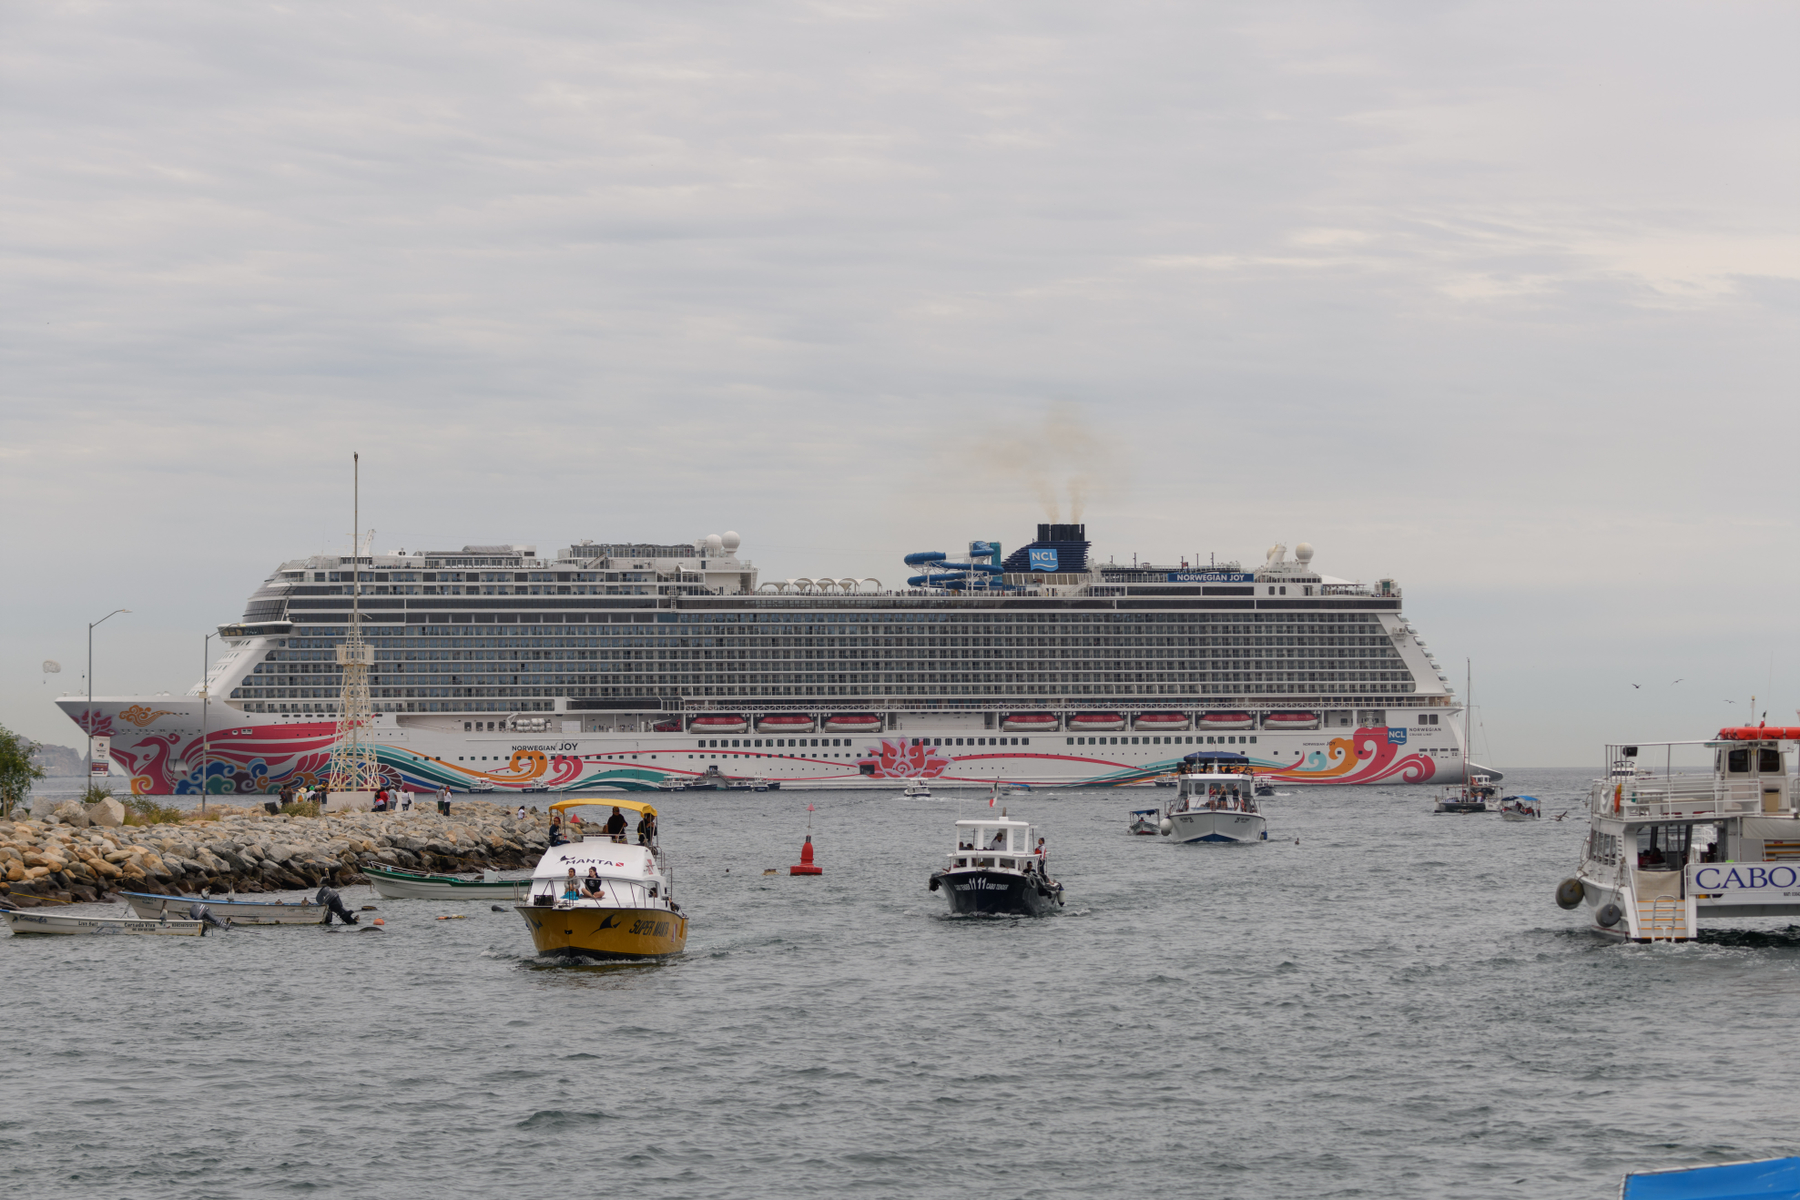 March 10, 2020When a cruise ship comes to port, lots and lots of boat traffic ensues.   Rocky Point had its first official case of COVID-19 the...